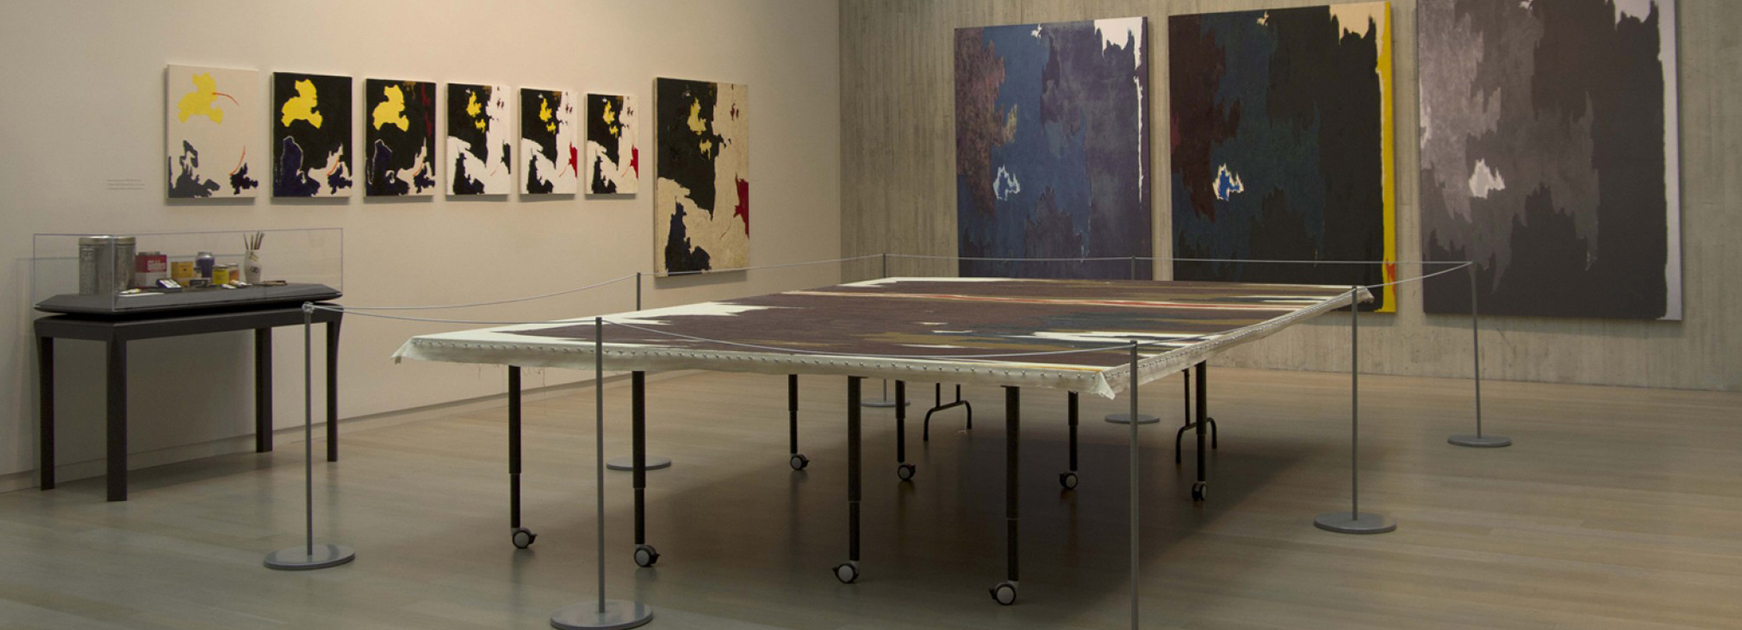 Photo of a gallery in the Clyfford Still Museum with artworks on the wall and a painting displayed on a table in the center of the room